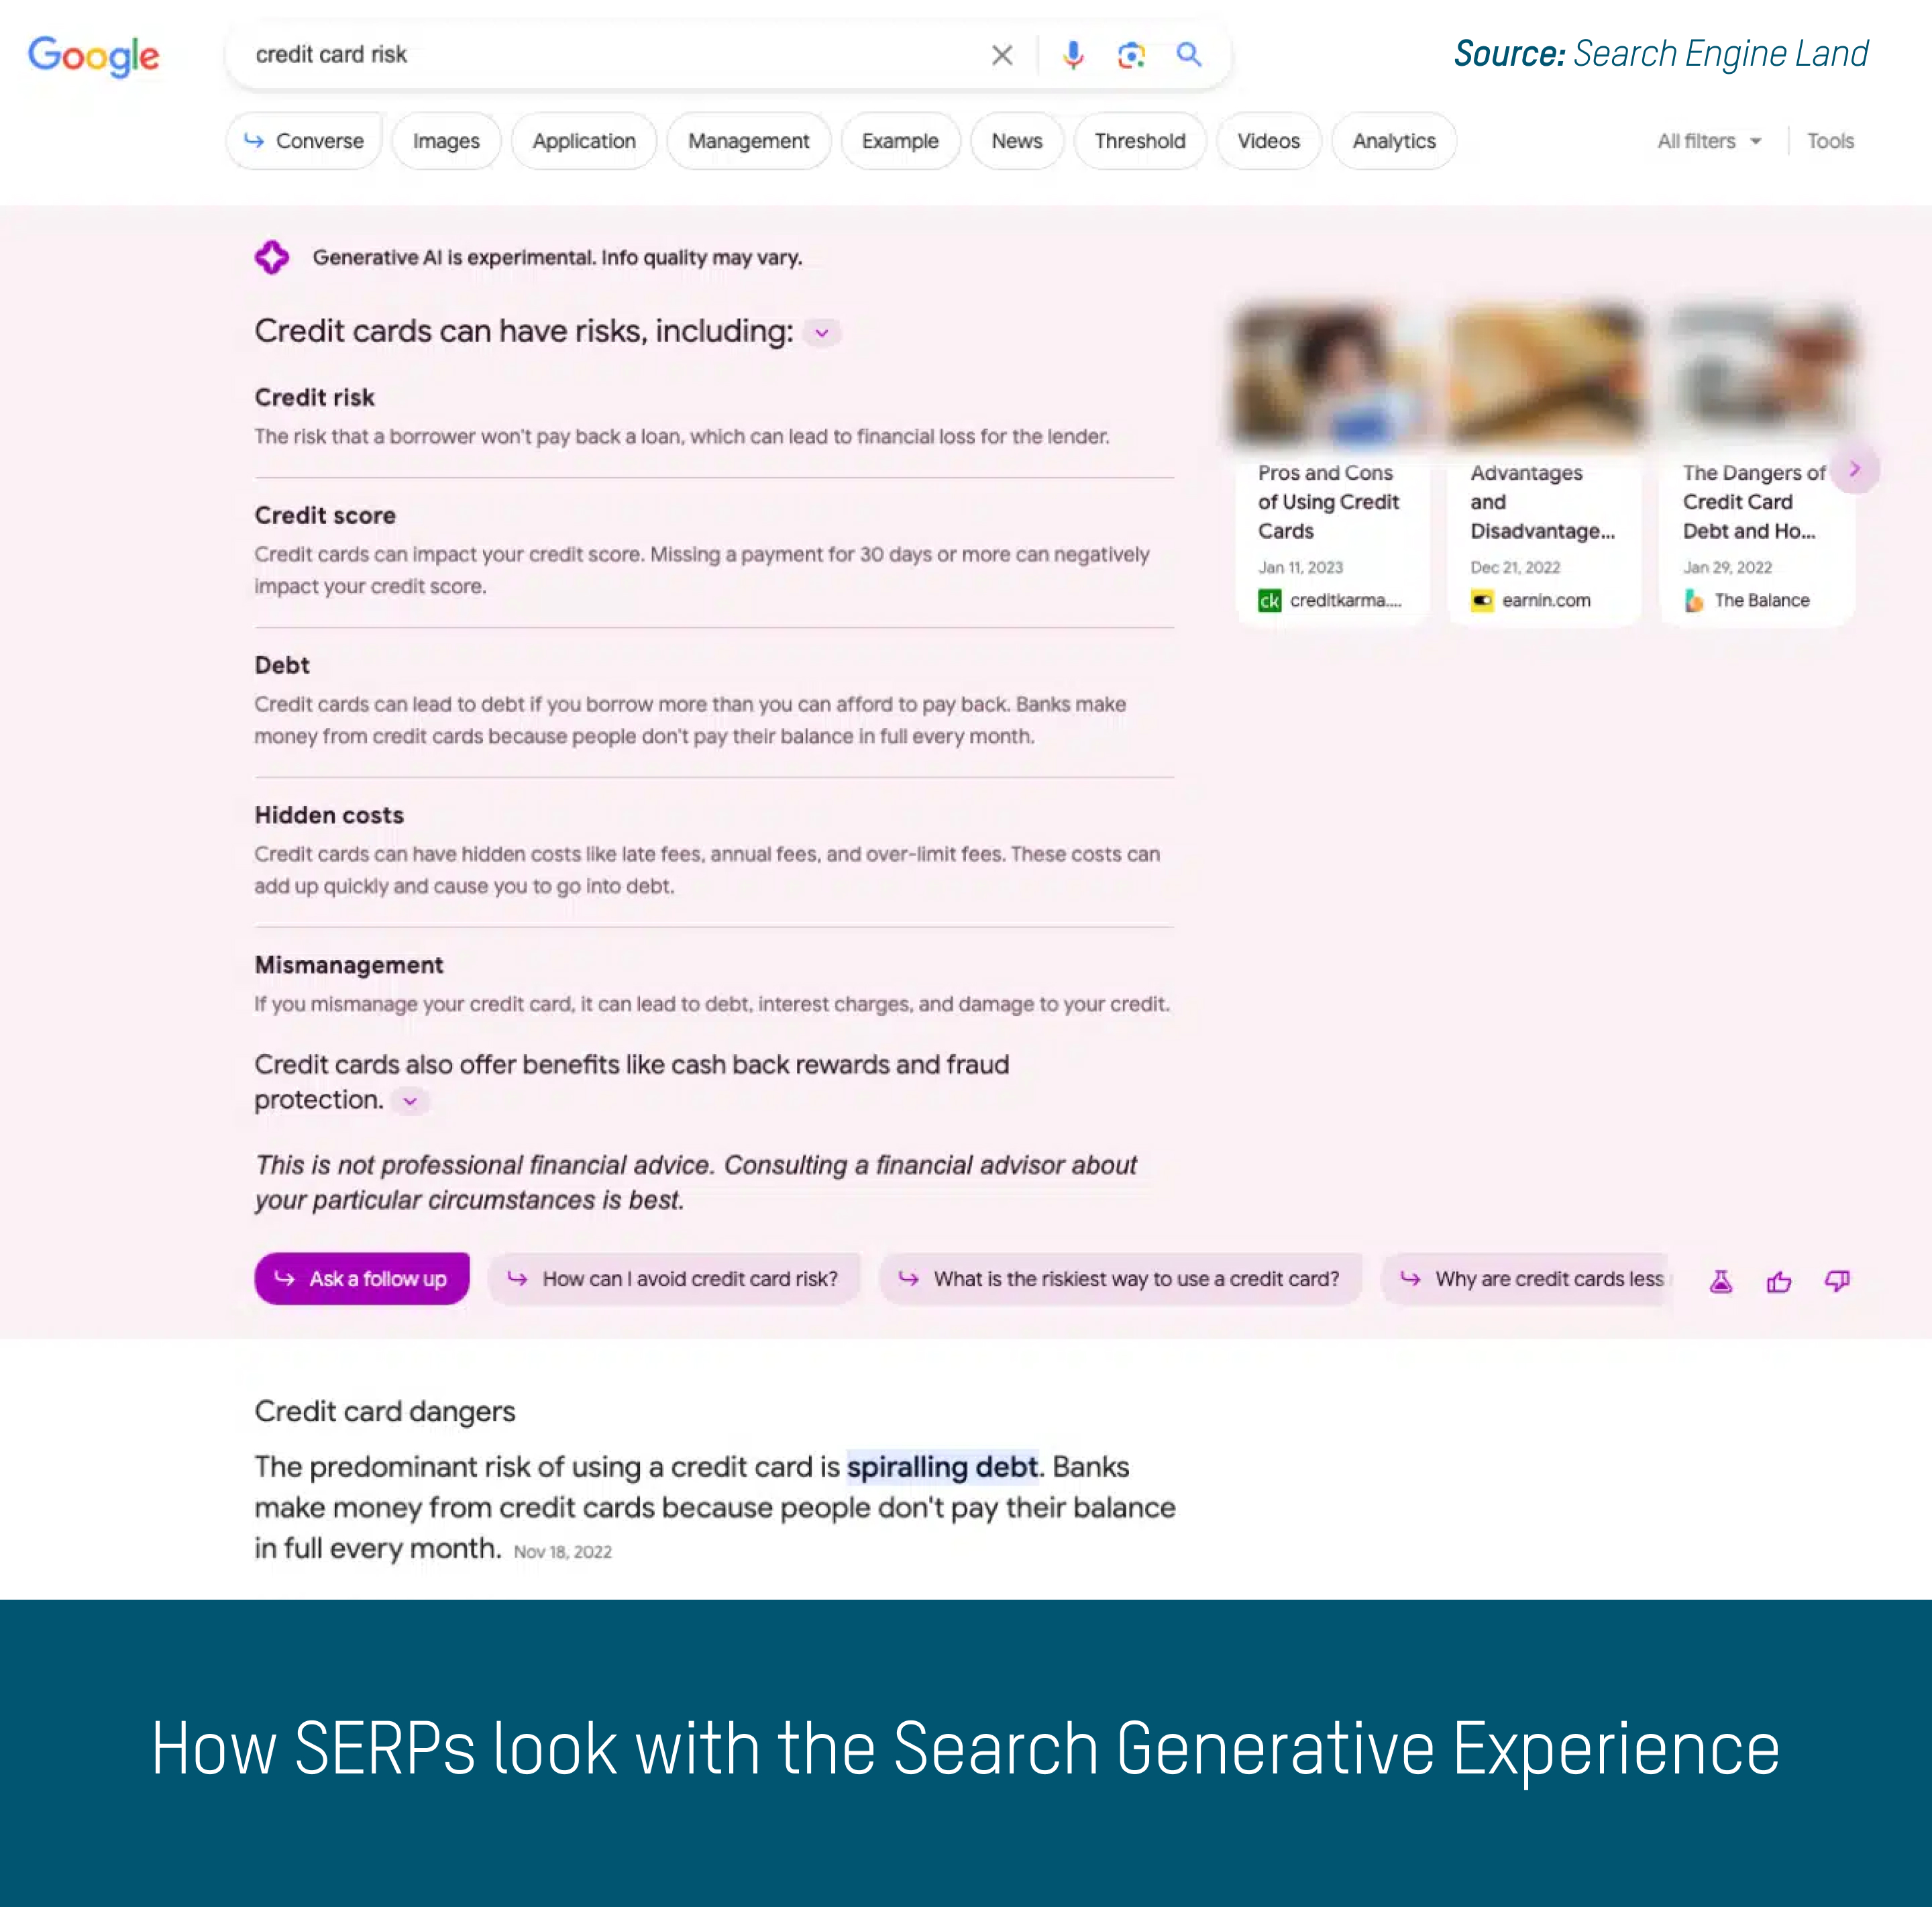 SERPs with the Search Generative Experience